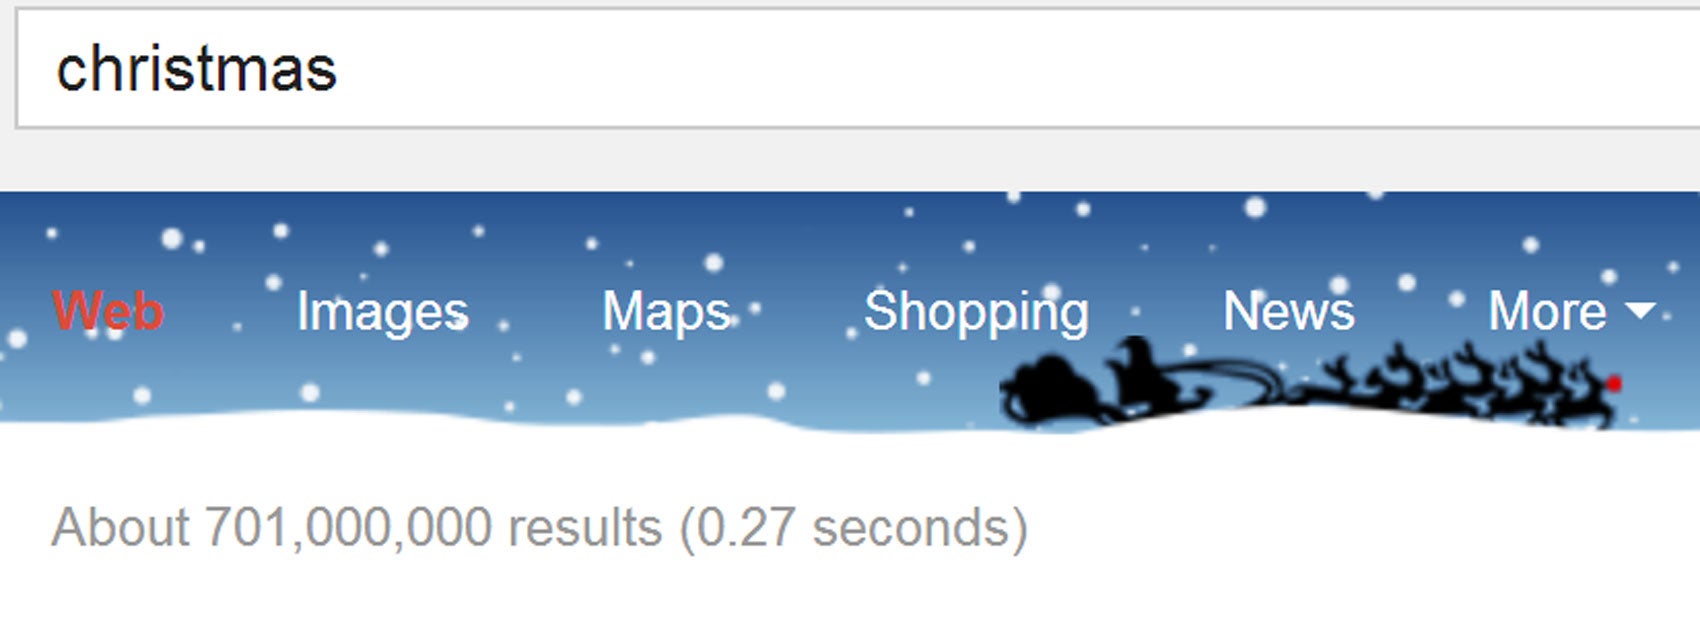 Google is marking Christmas on its page